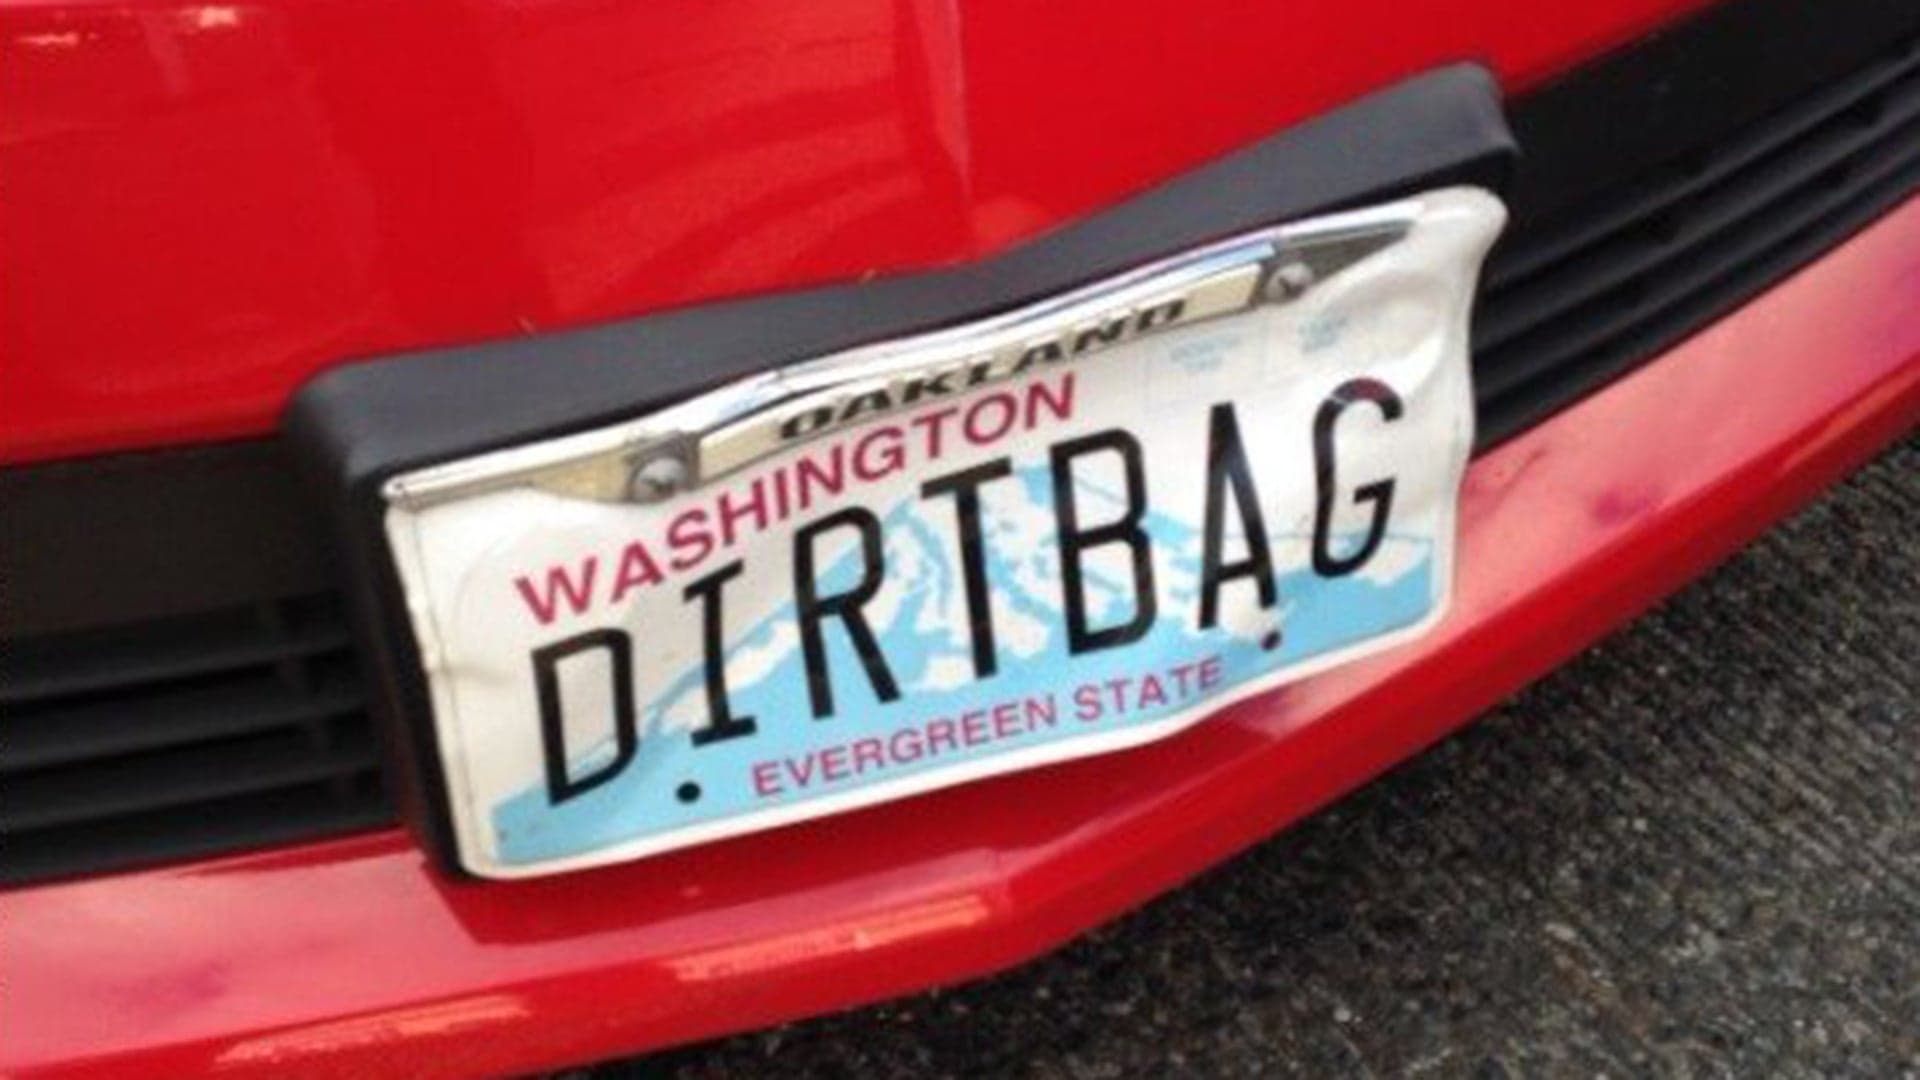 ‘Series of Bad Decisions’ Lands Chevy Camaro Driver With ‘DIRTBAG’ Vanity Plate in Jail